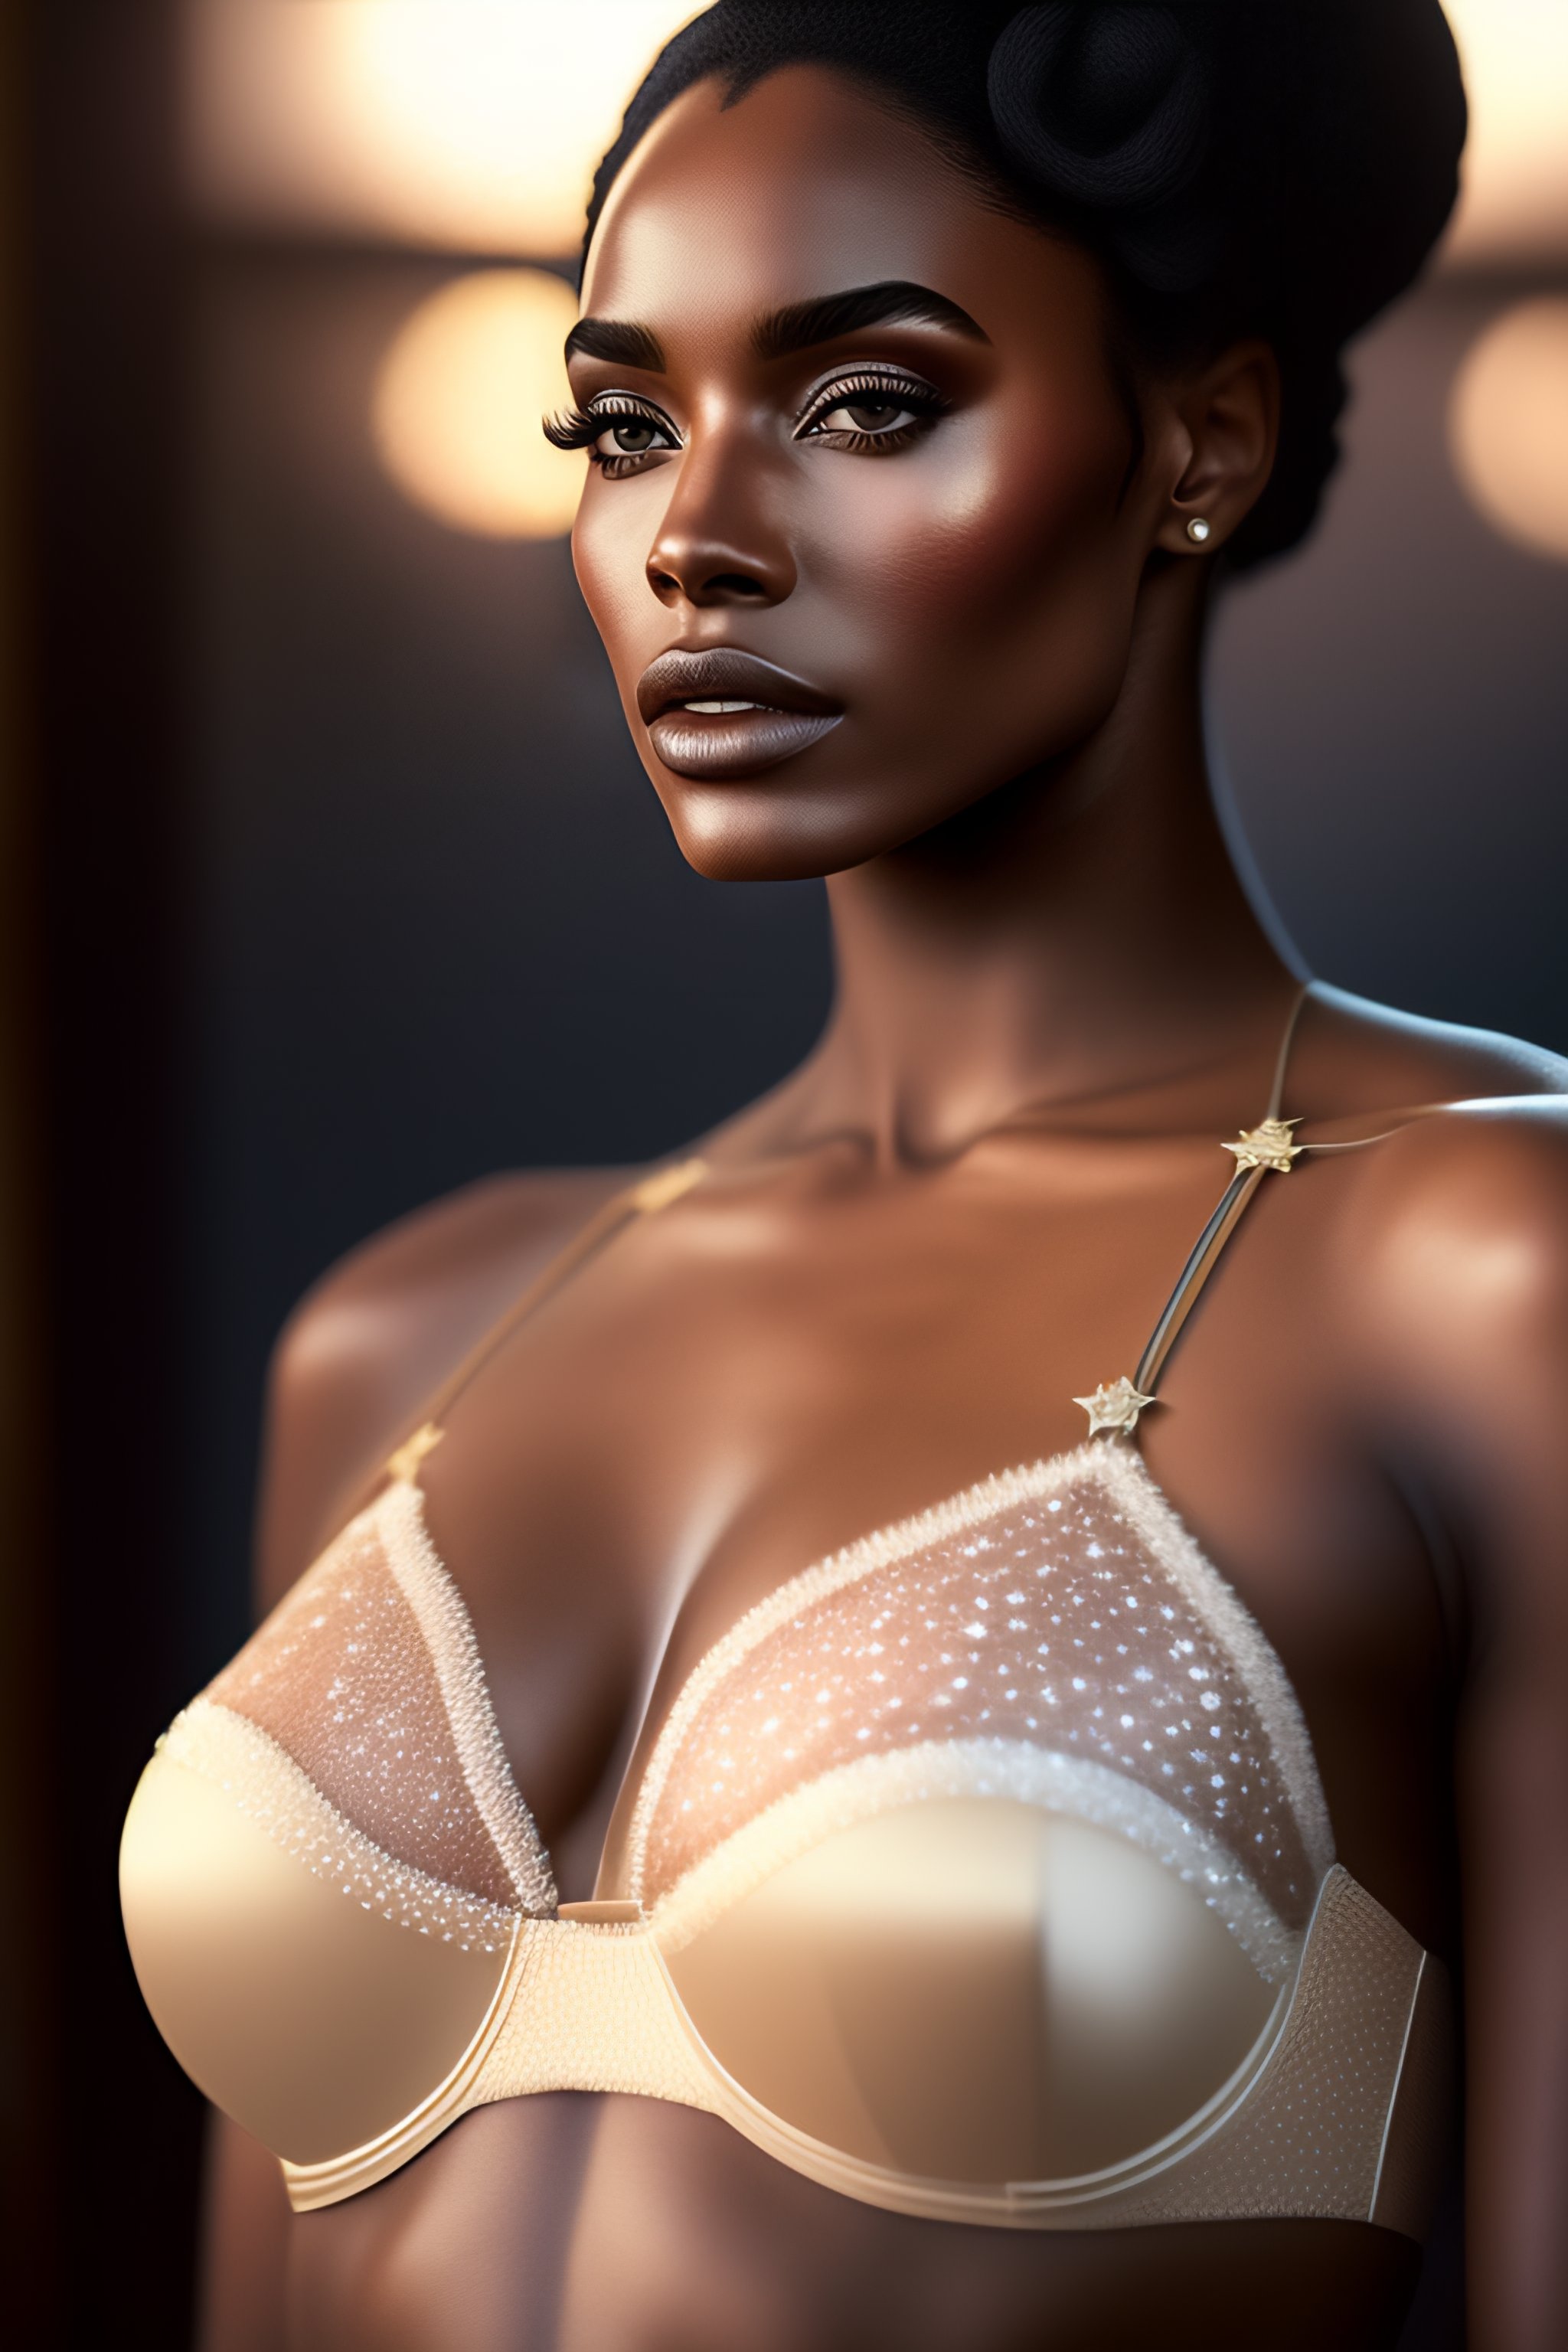 Lexica - Skin color silk tulle bra with lines and stars